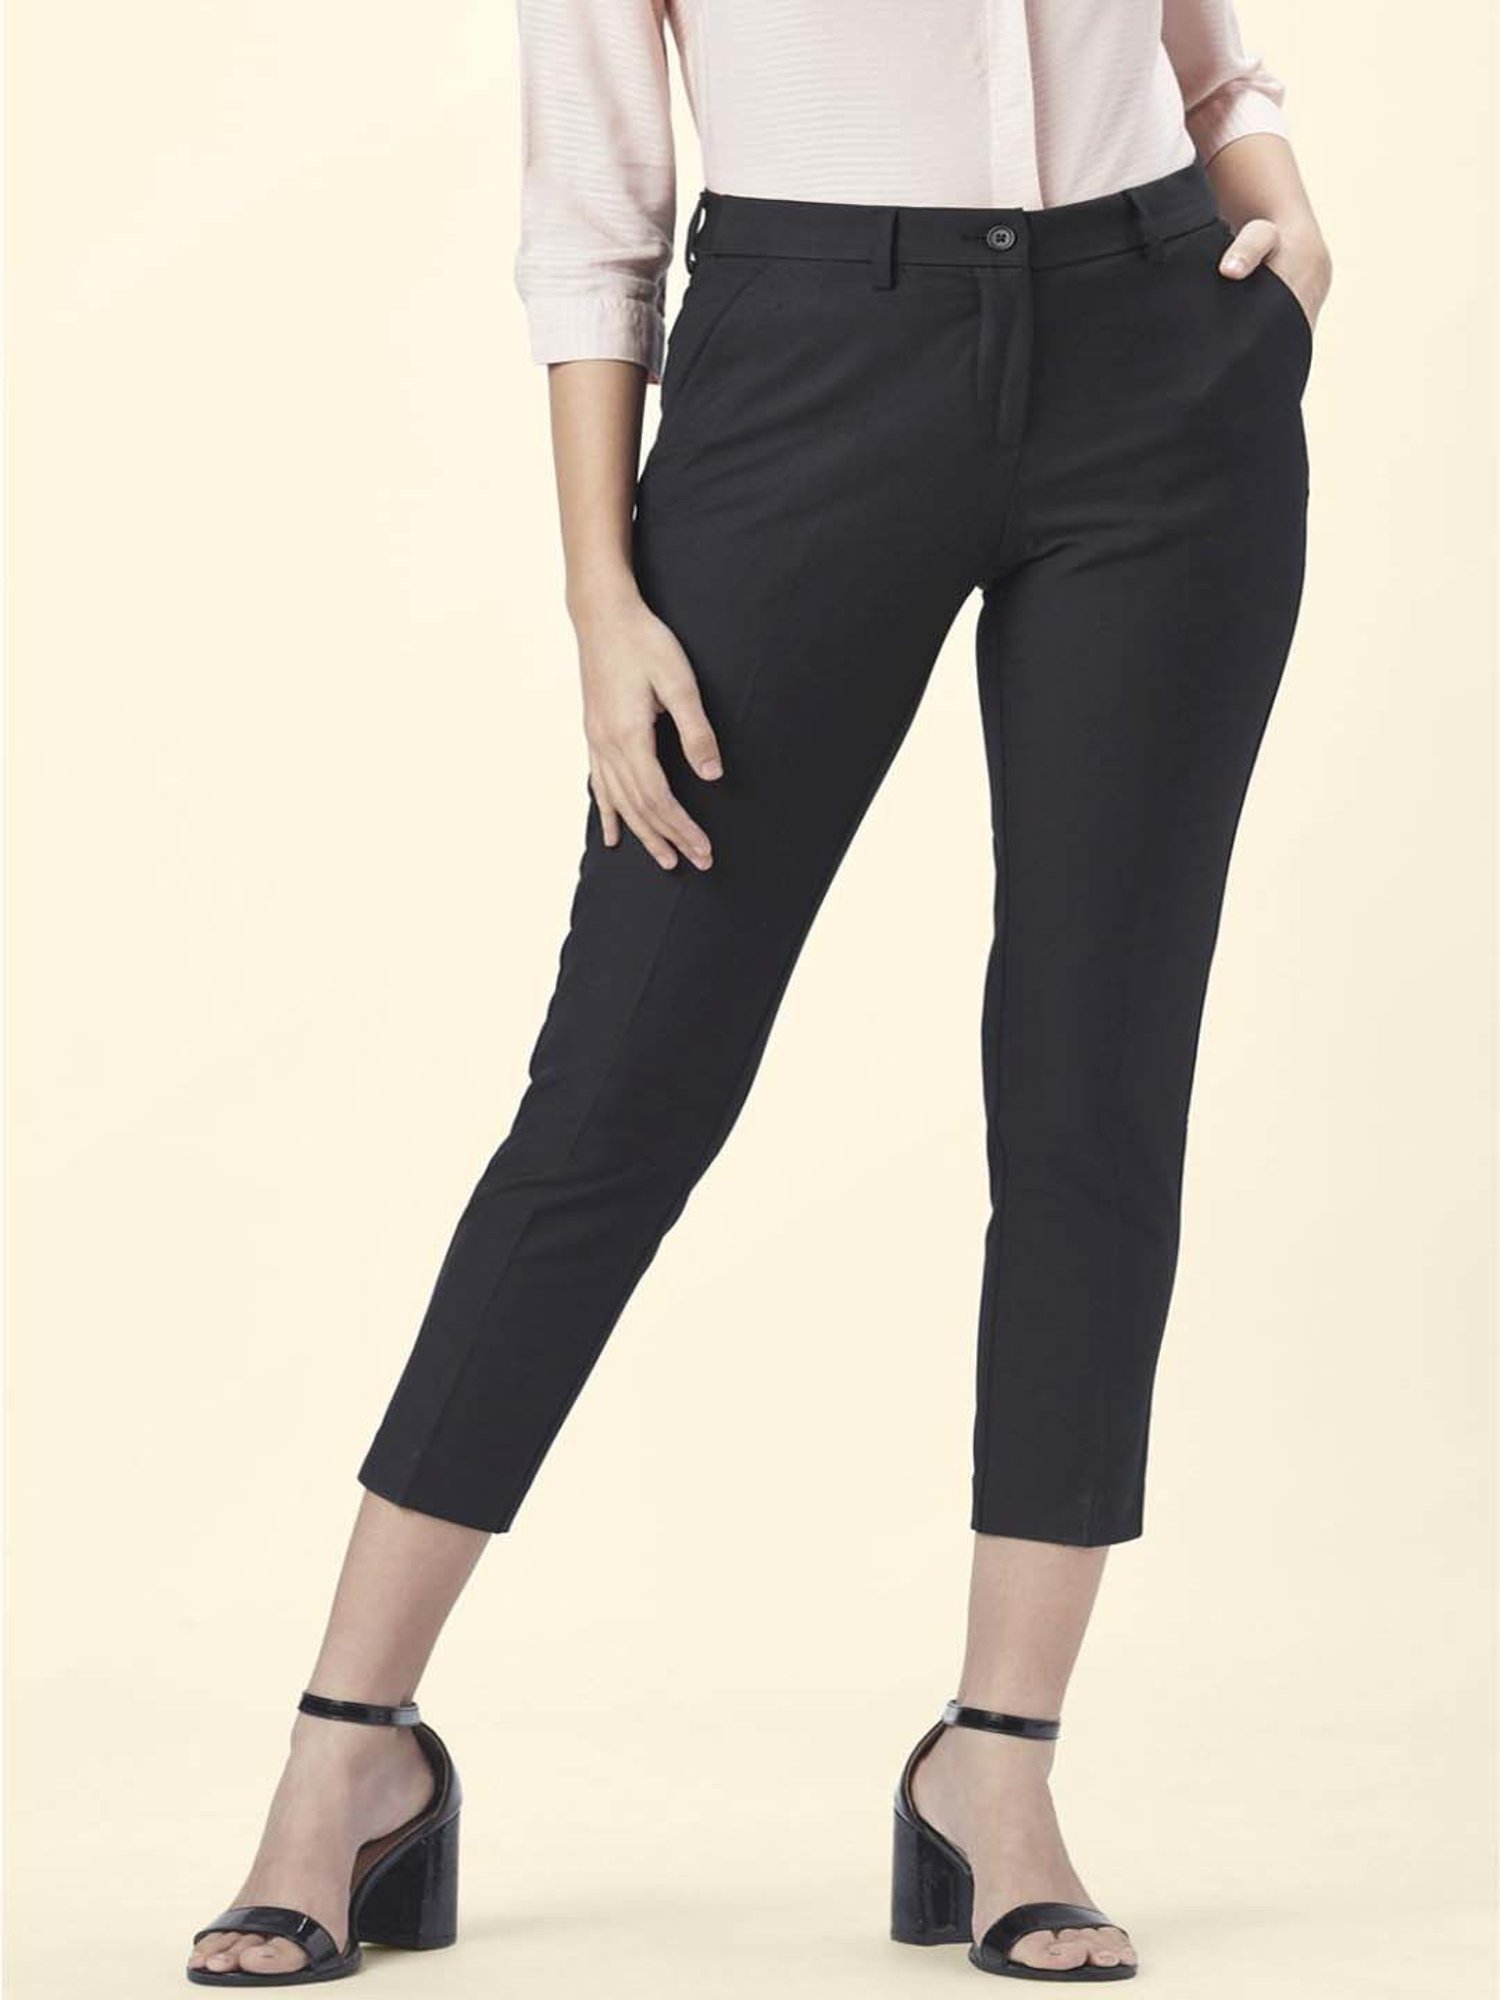 Buy BLUSH Trousers  Pants for Women by Annabelle by Pantaloons Online   Ajiocom